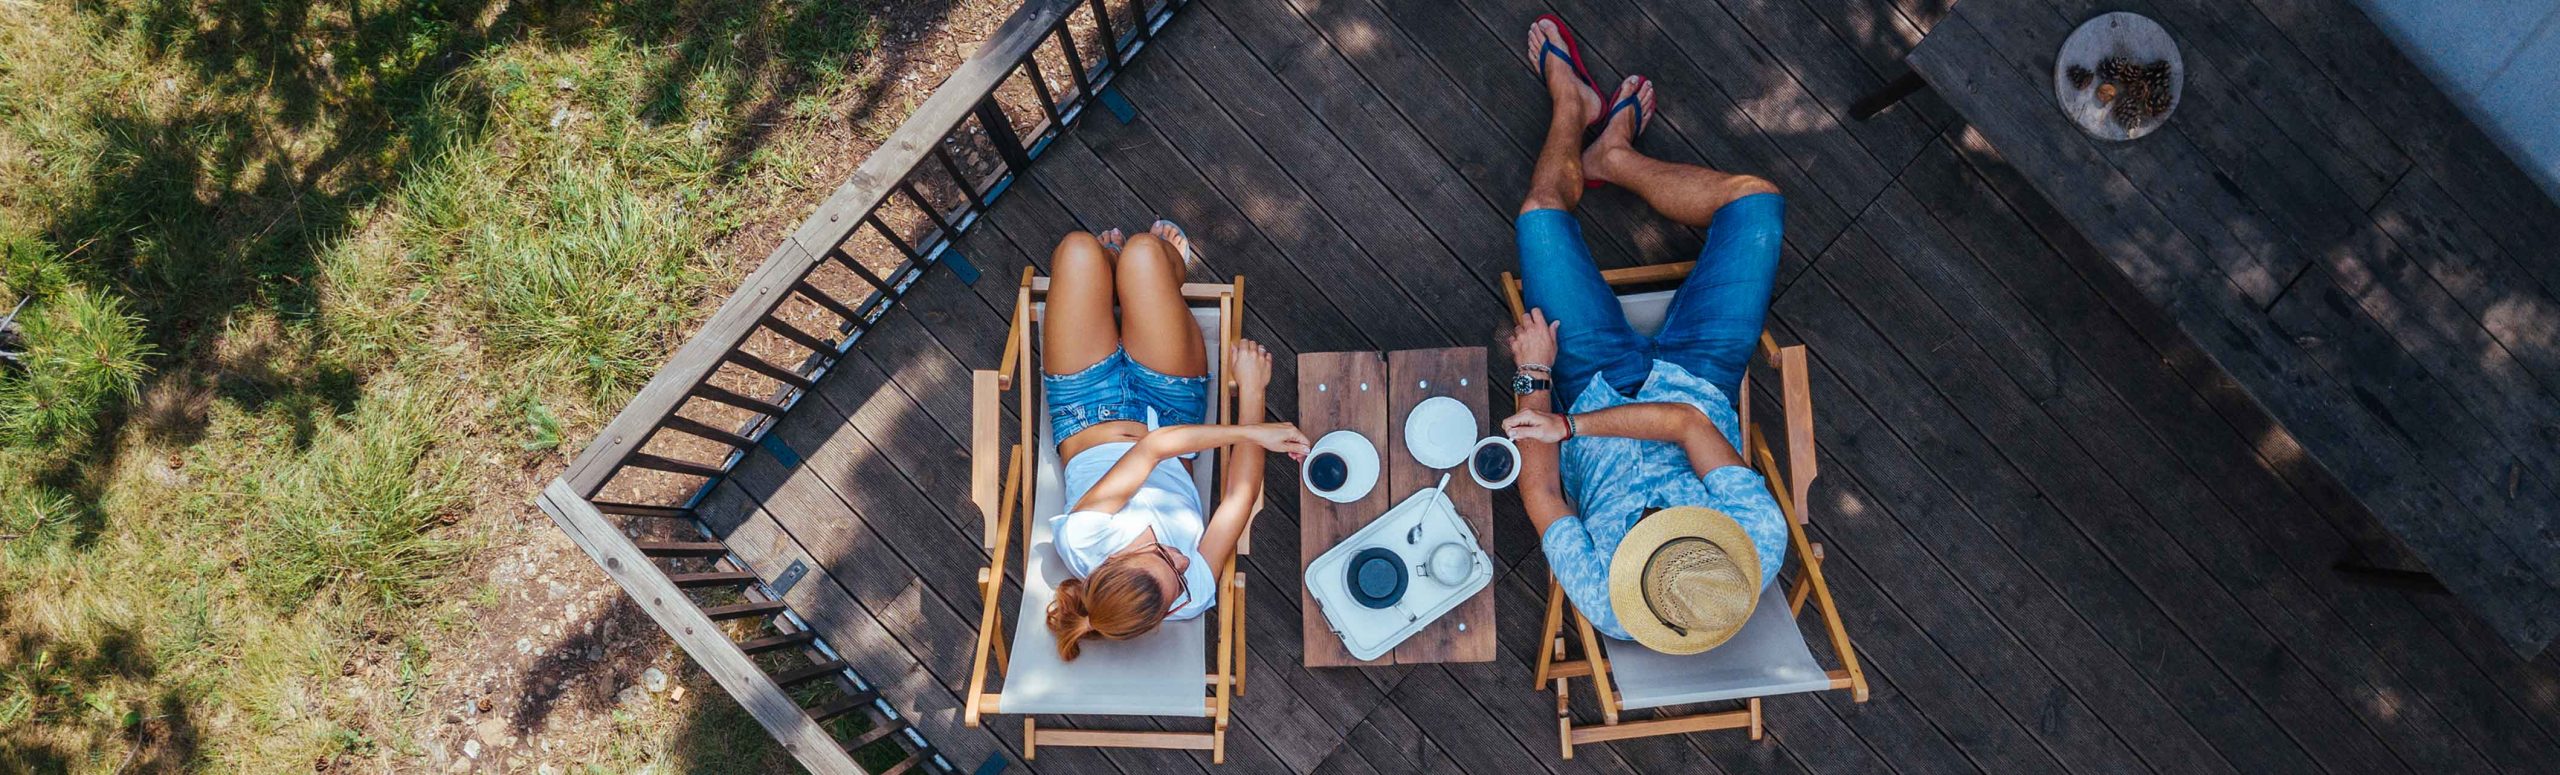 Birds eye view of 2 people sitting outside on a deck with coffee